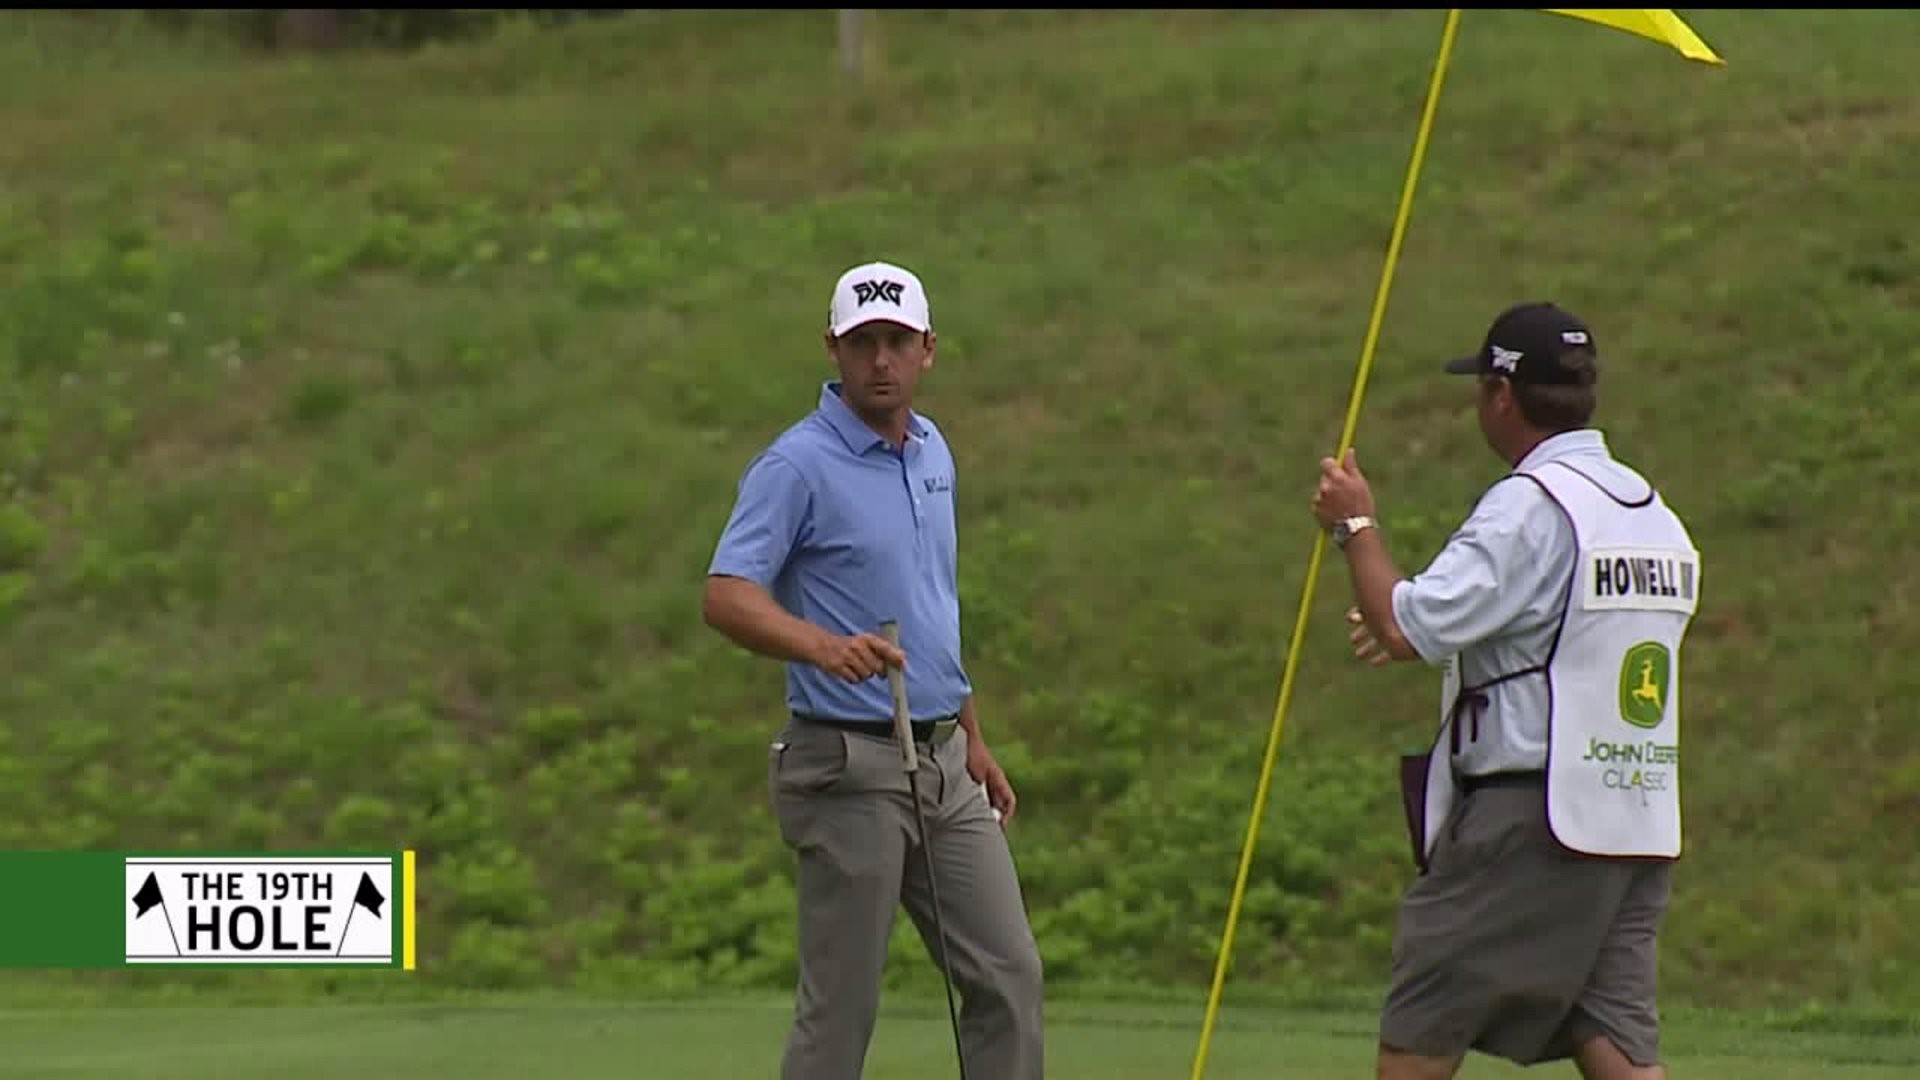 Charles Howell III with a share of the lead with -8